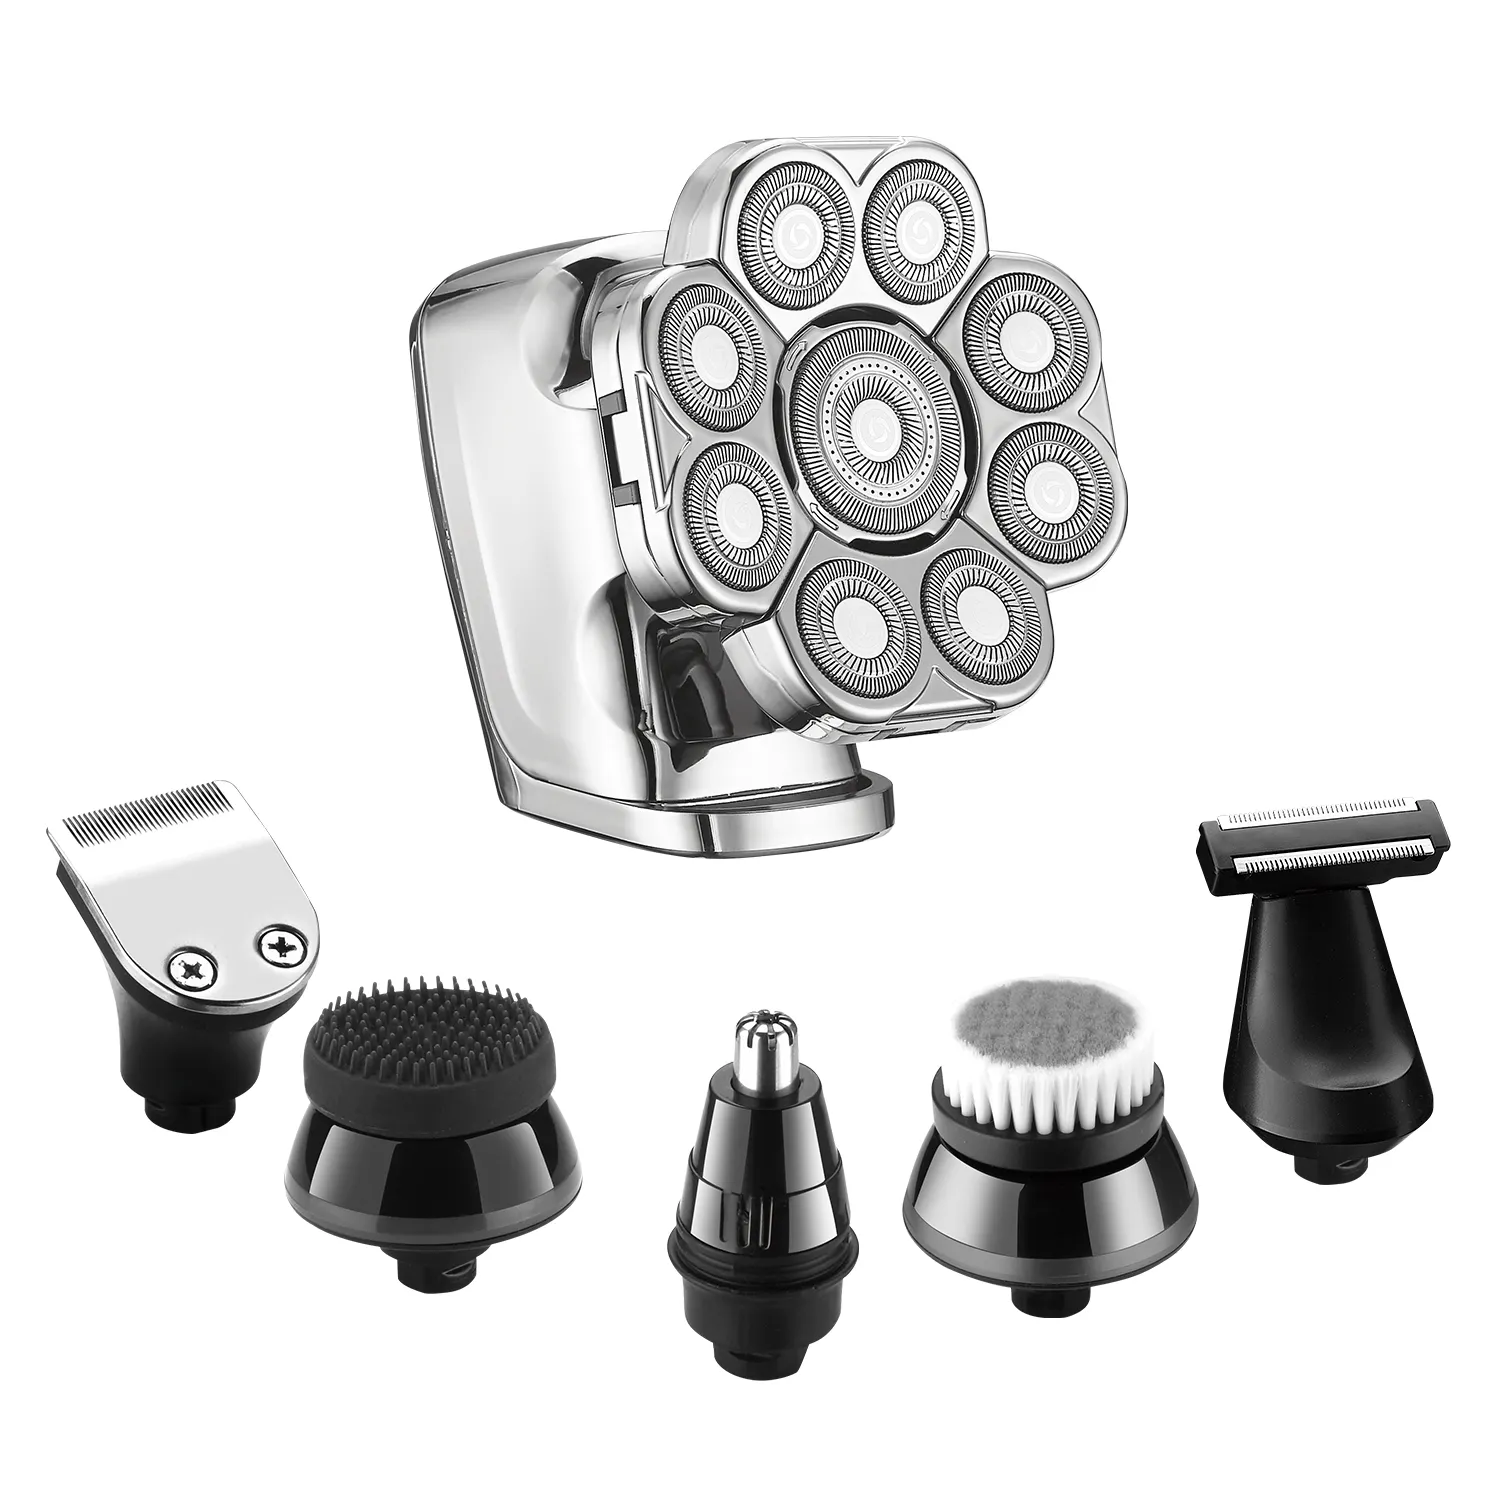 9d Bald Men Rechargeable usb Rotary Shaver Ipx6 Waterproof Wet Dry Grooming Kit 9 In 1 Head Shavers For Men